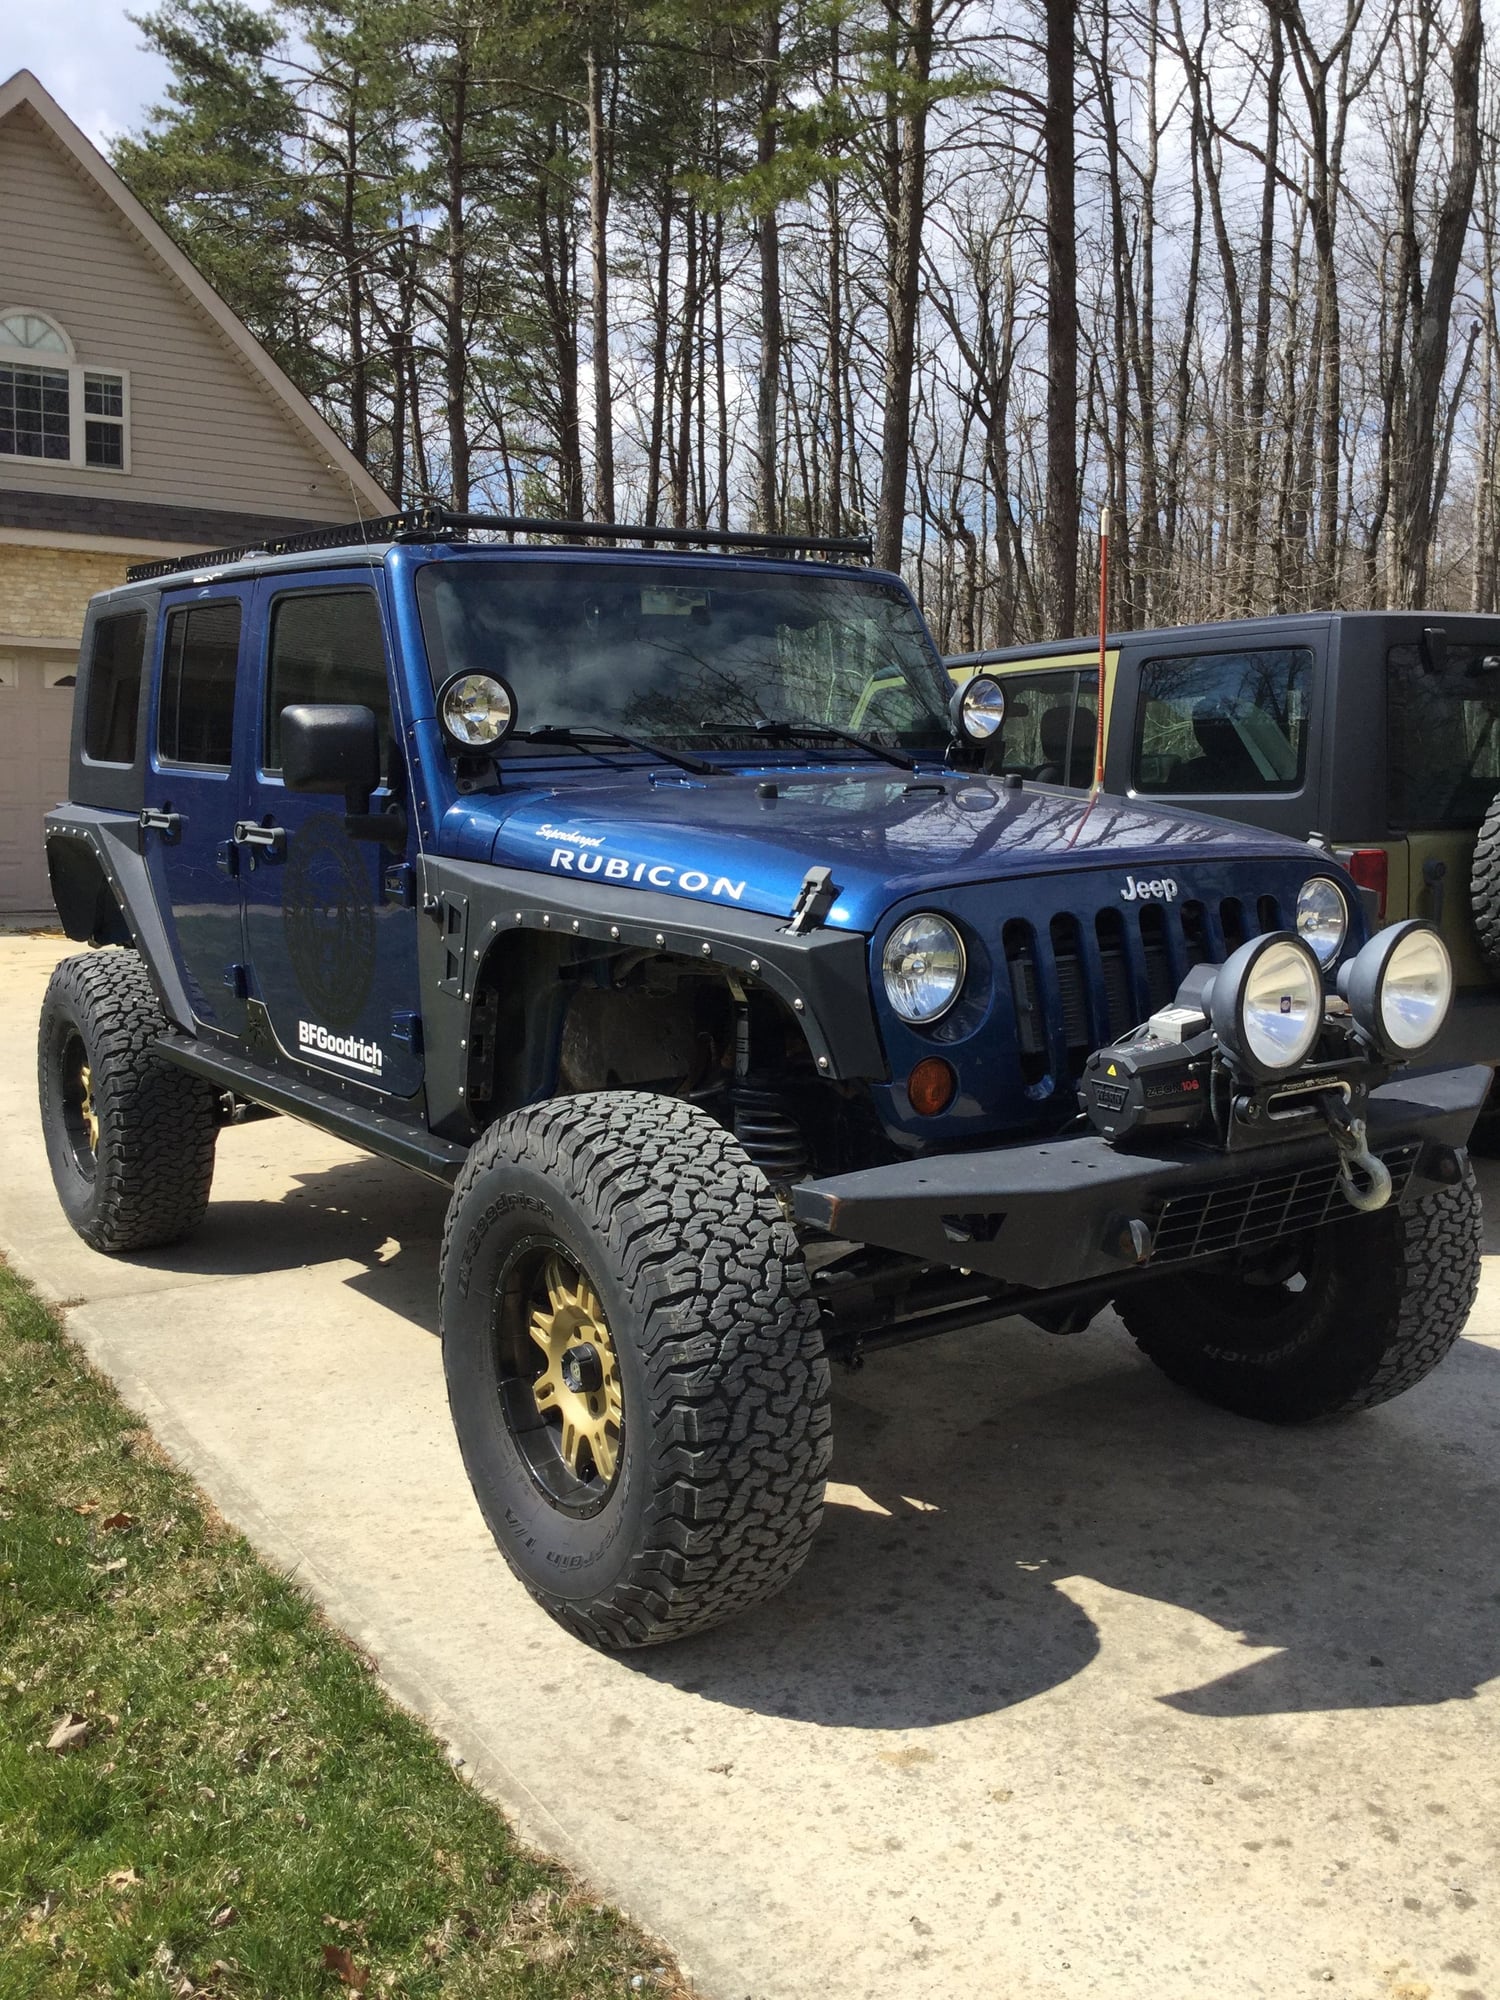 2010 Jeep Wrangler - 2010 Wrangler JKU Rubicon Loaded - Used - VIN 12345678910 - 126,000 Miles - 6 cyl - 4WD - Automatic - SUV - Blue - Crab Orchard, TN 37723, United States